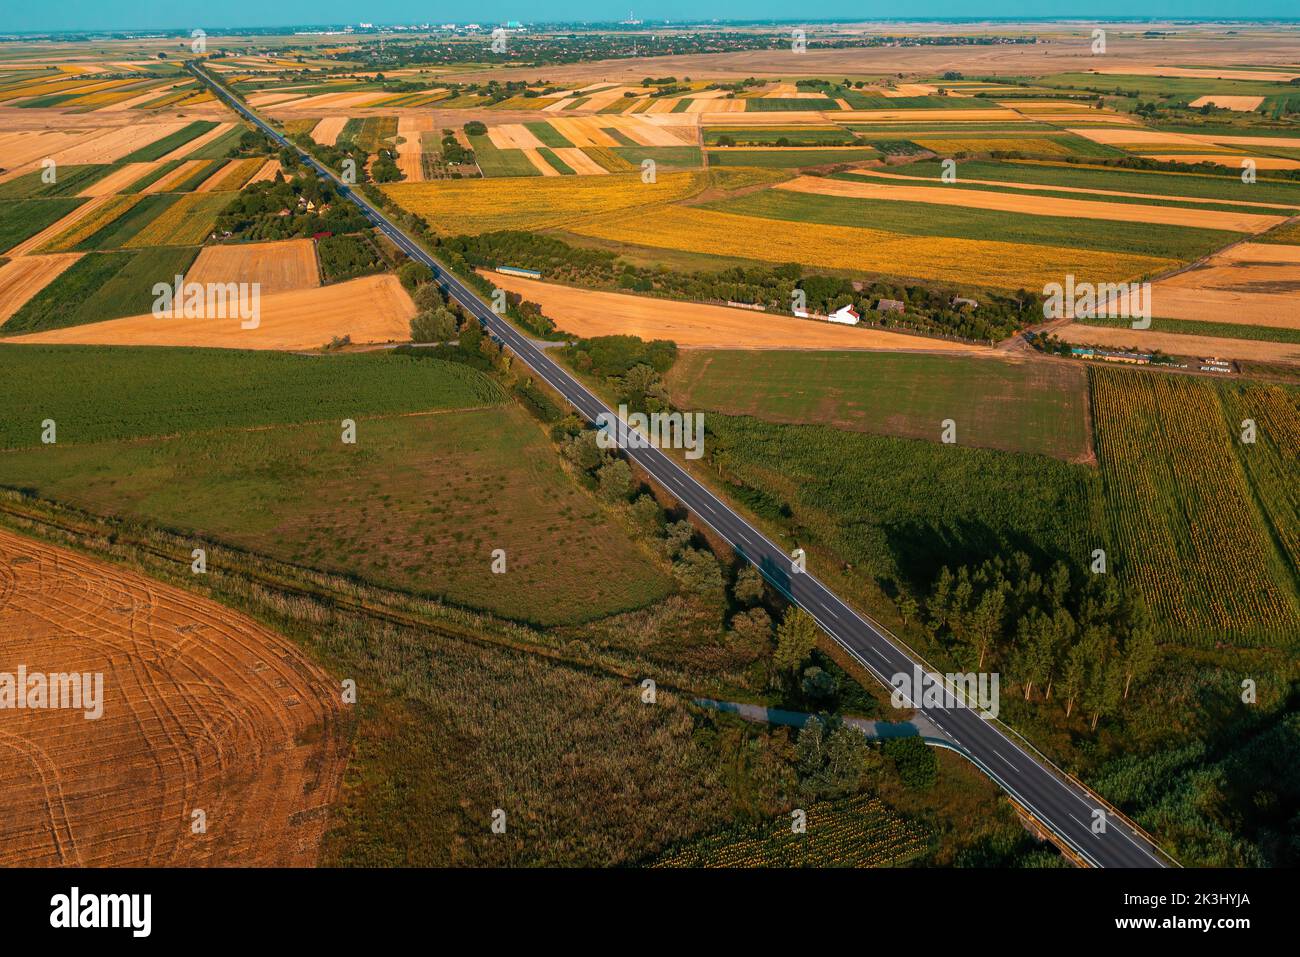 Aerial shot of straight highway through cultivated agricultural fields in Vojvodina, Serbia from drone pov Stock Photo